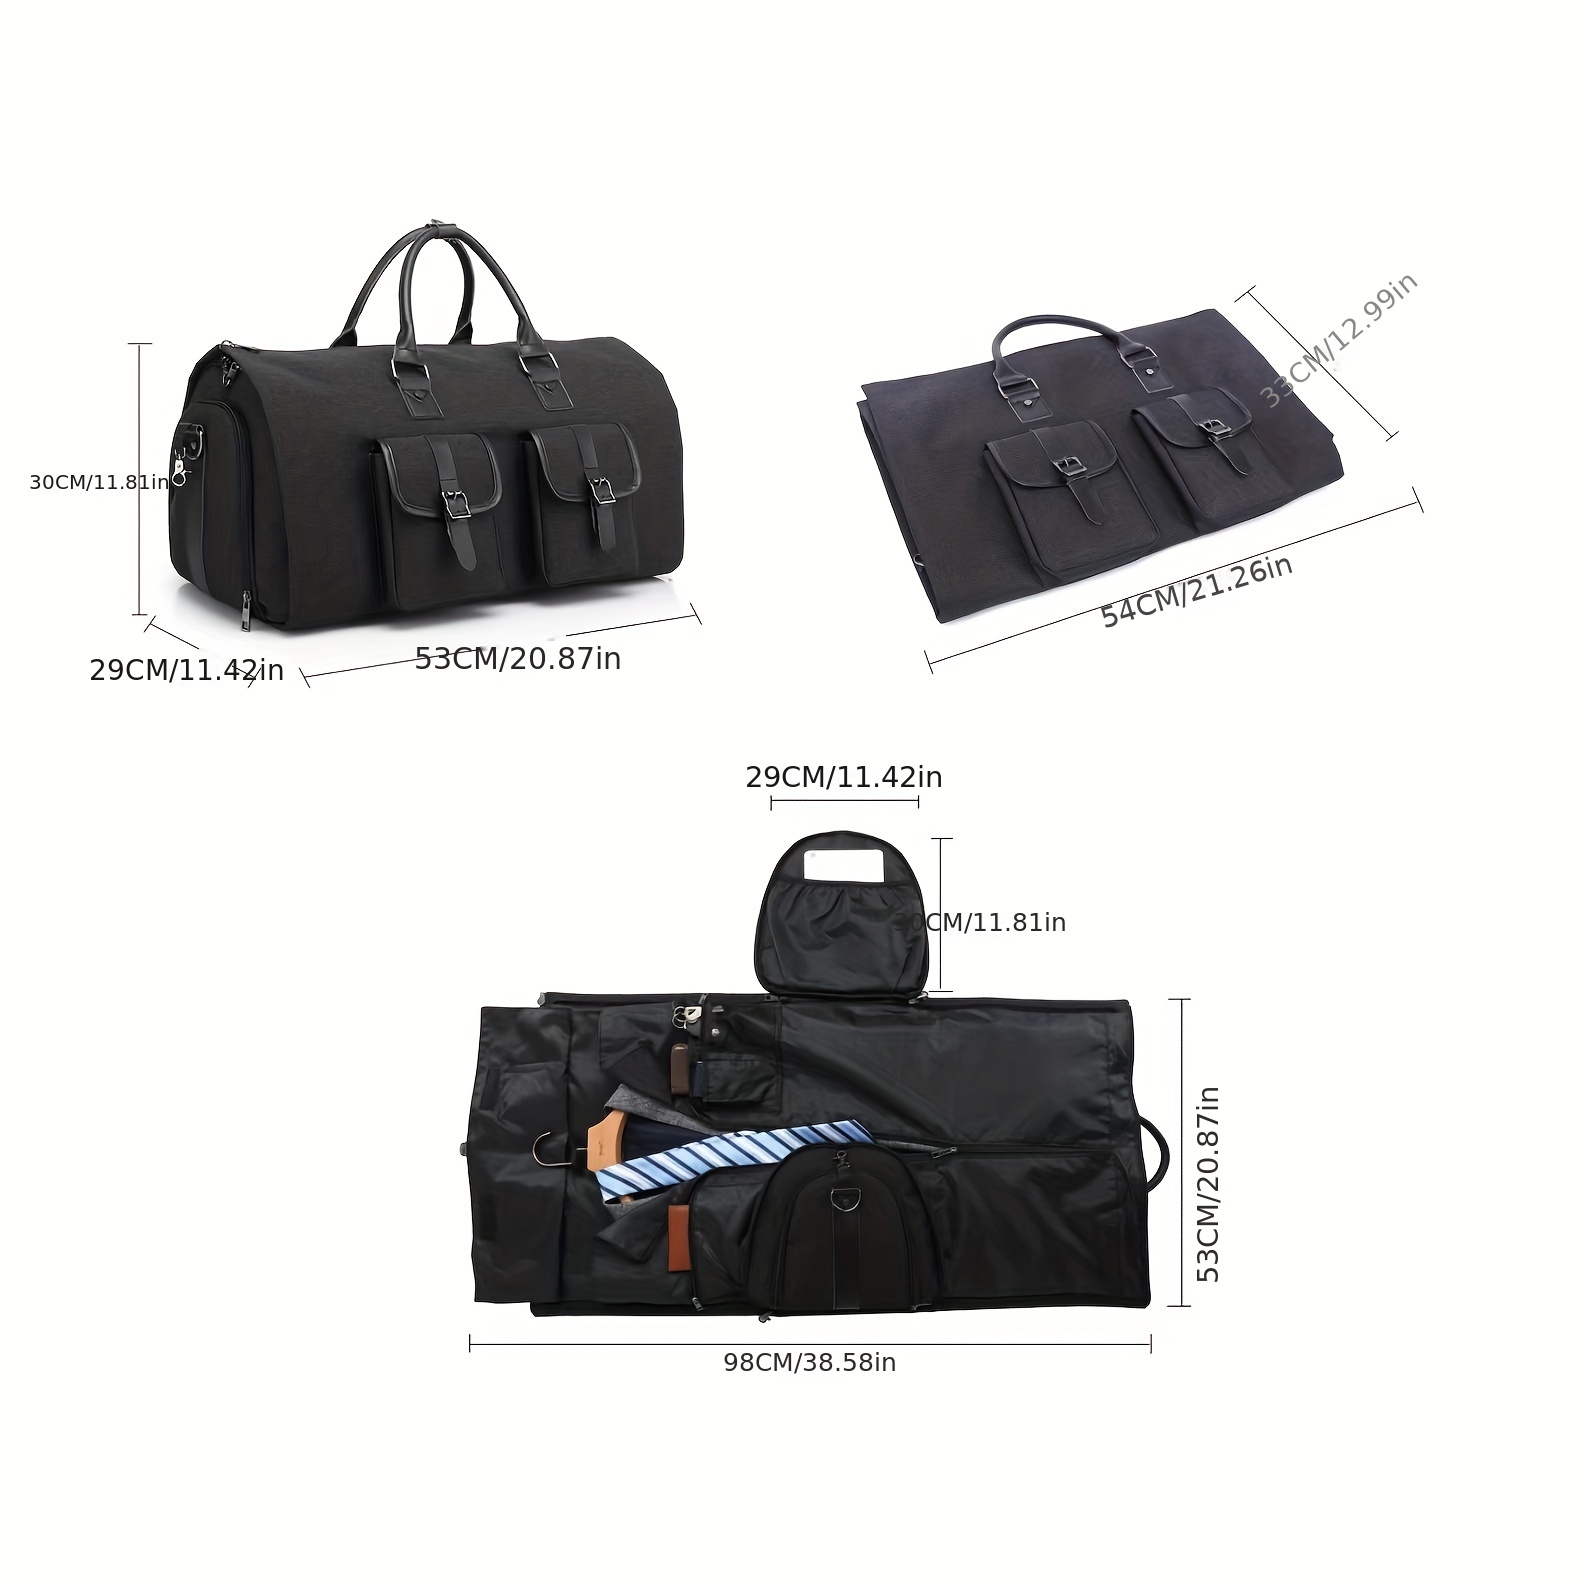 Mens Travel Small Gym Duffle Stylish Garment Carrier For Home, Office, And  Outdoors From Xiagu, $33.88